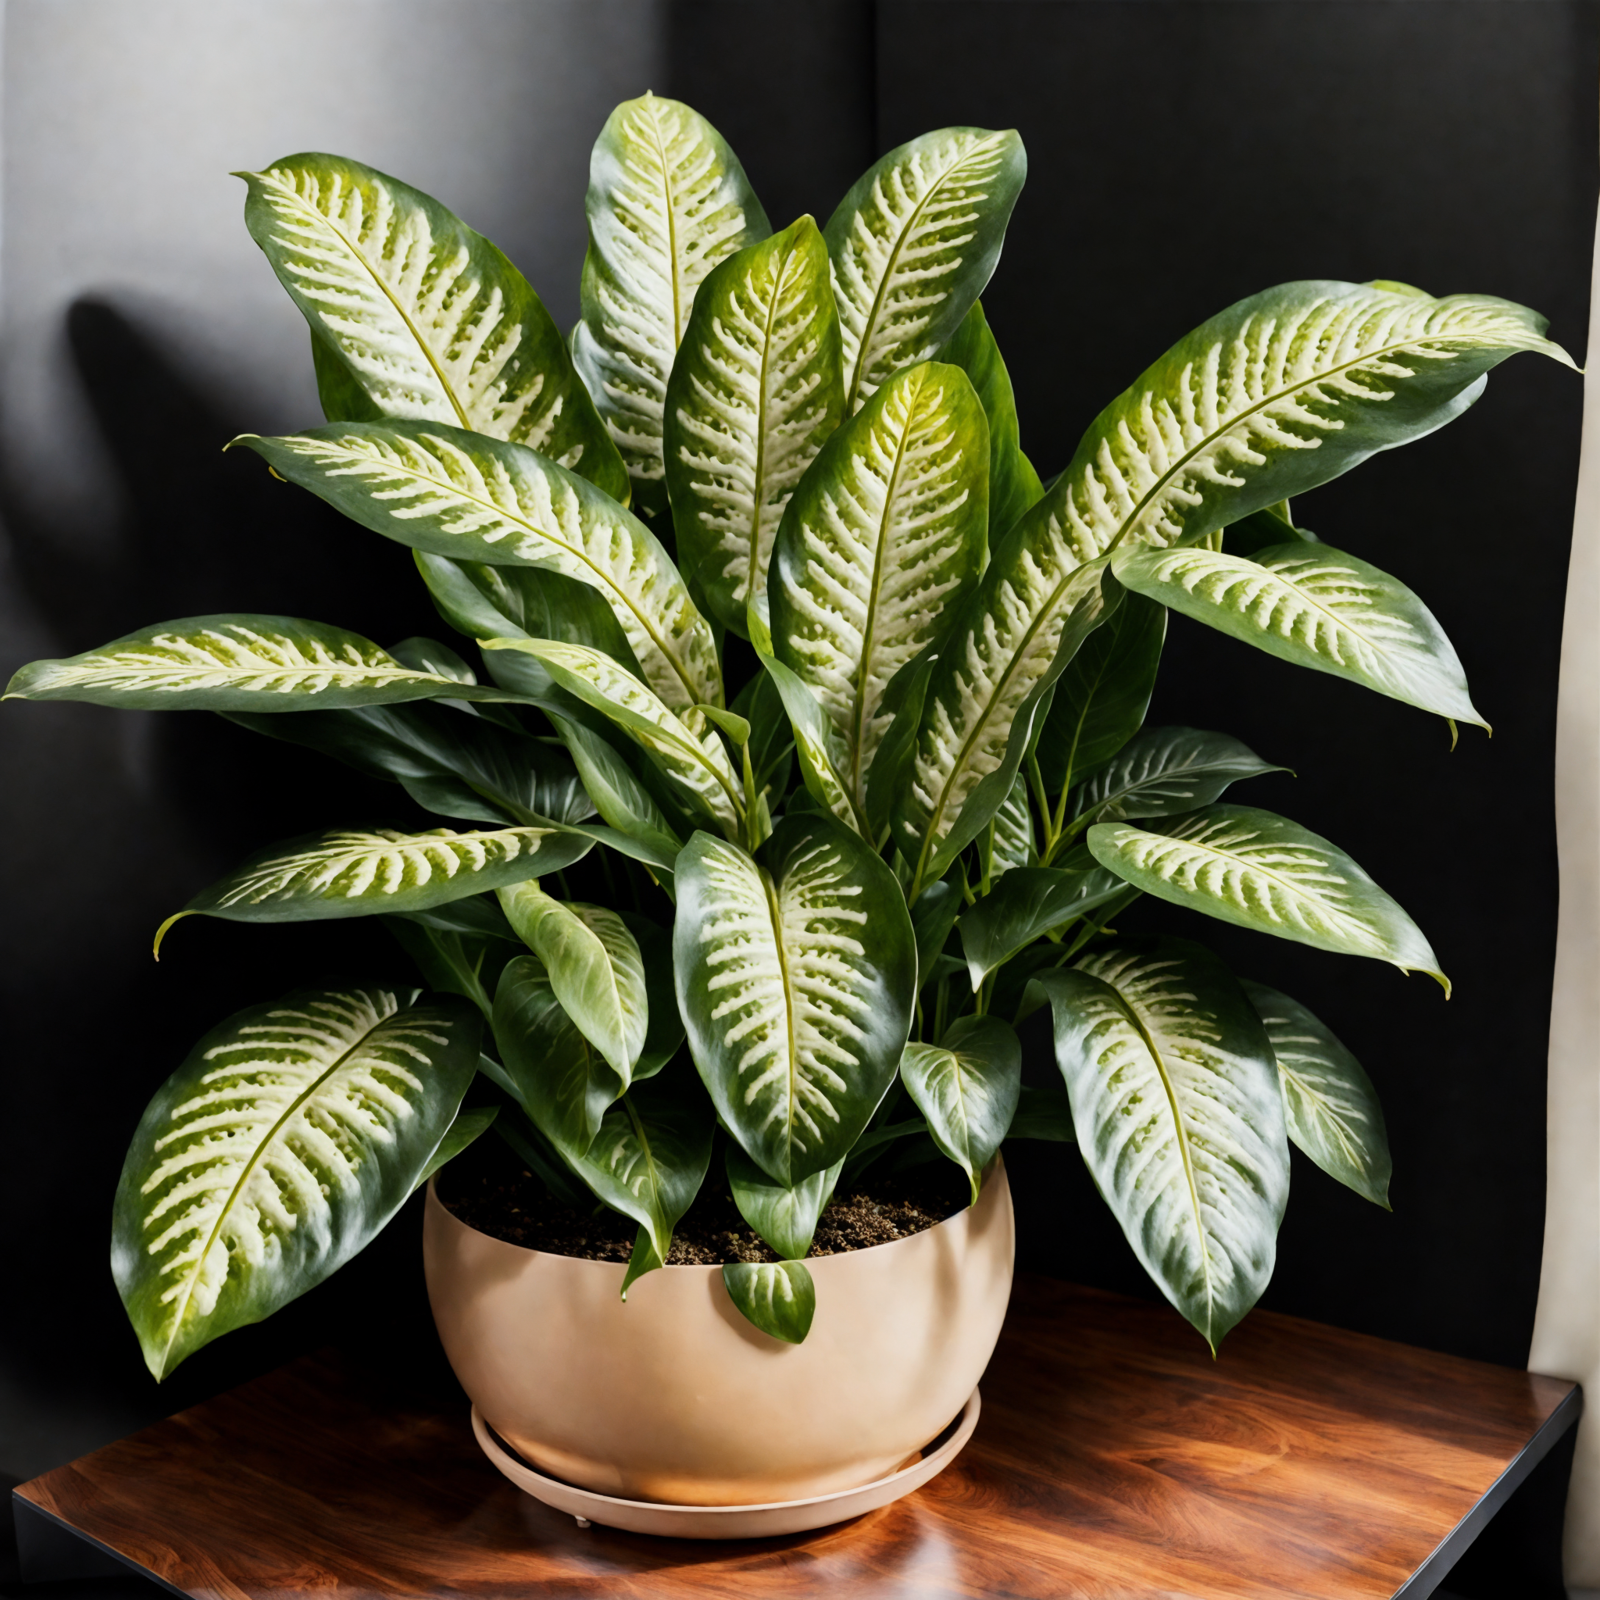 Dieffenbachia seguine in a bowl planter on a wooden table, with clear lighting and a dark background.